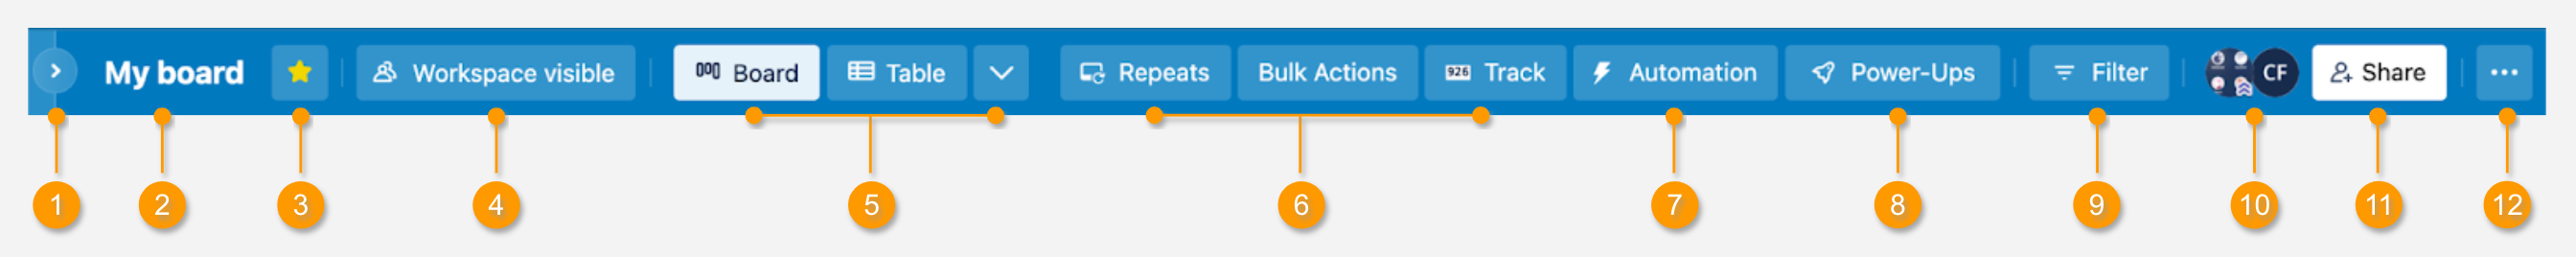 Trello board header. Shows buttons and navigation at the top of a Trello board.